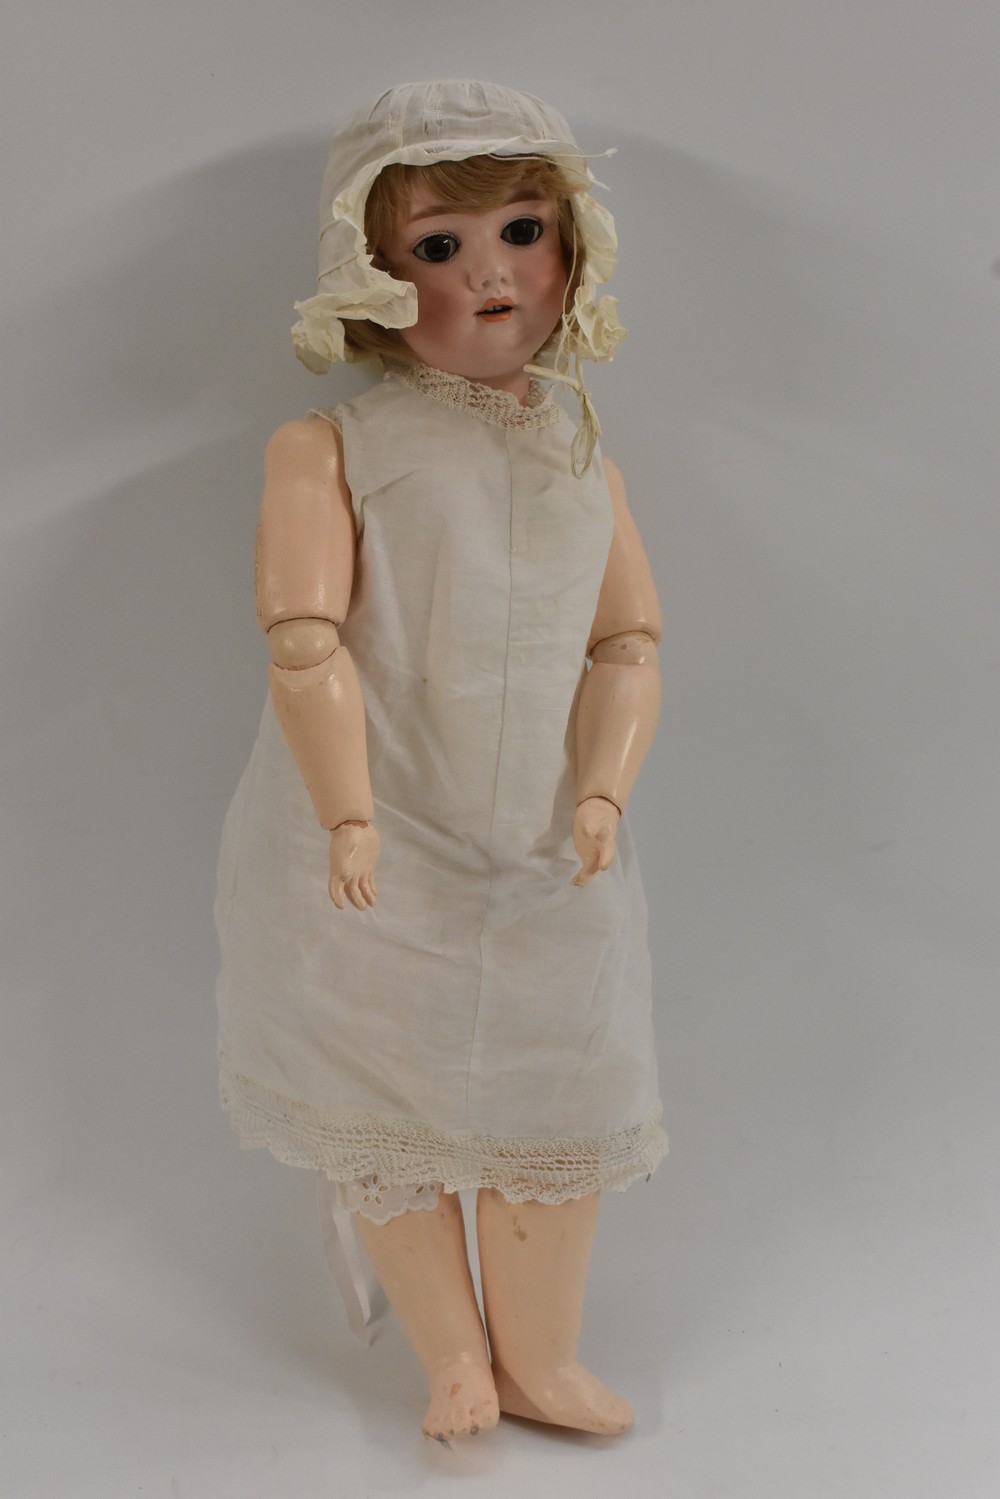 A Kley Hahn Walkure bisque head doll, with sleeping brown eyes, open mouth, four upper teeth,